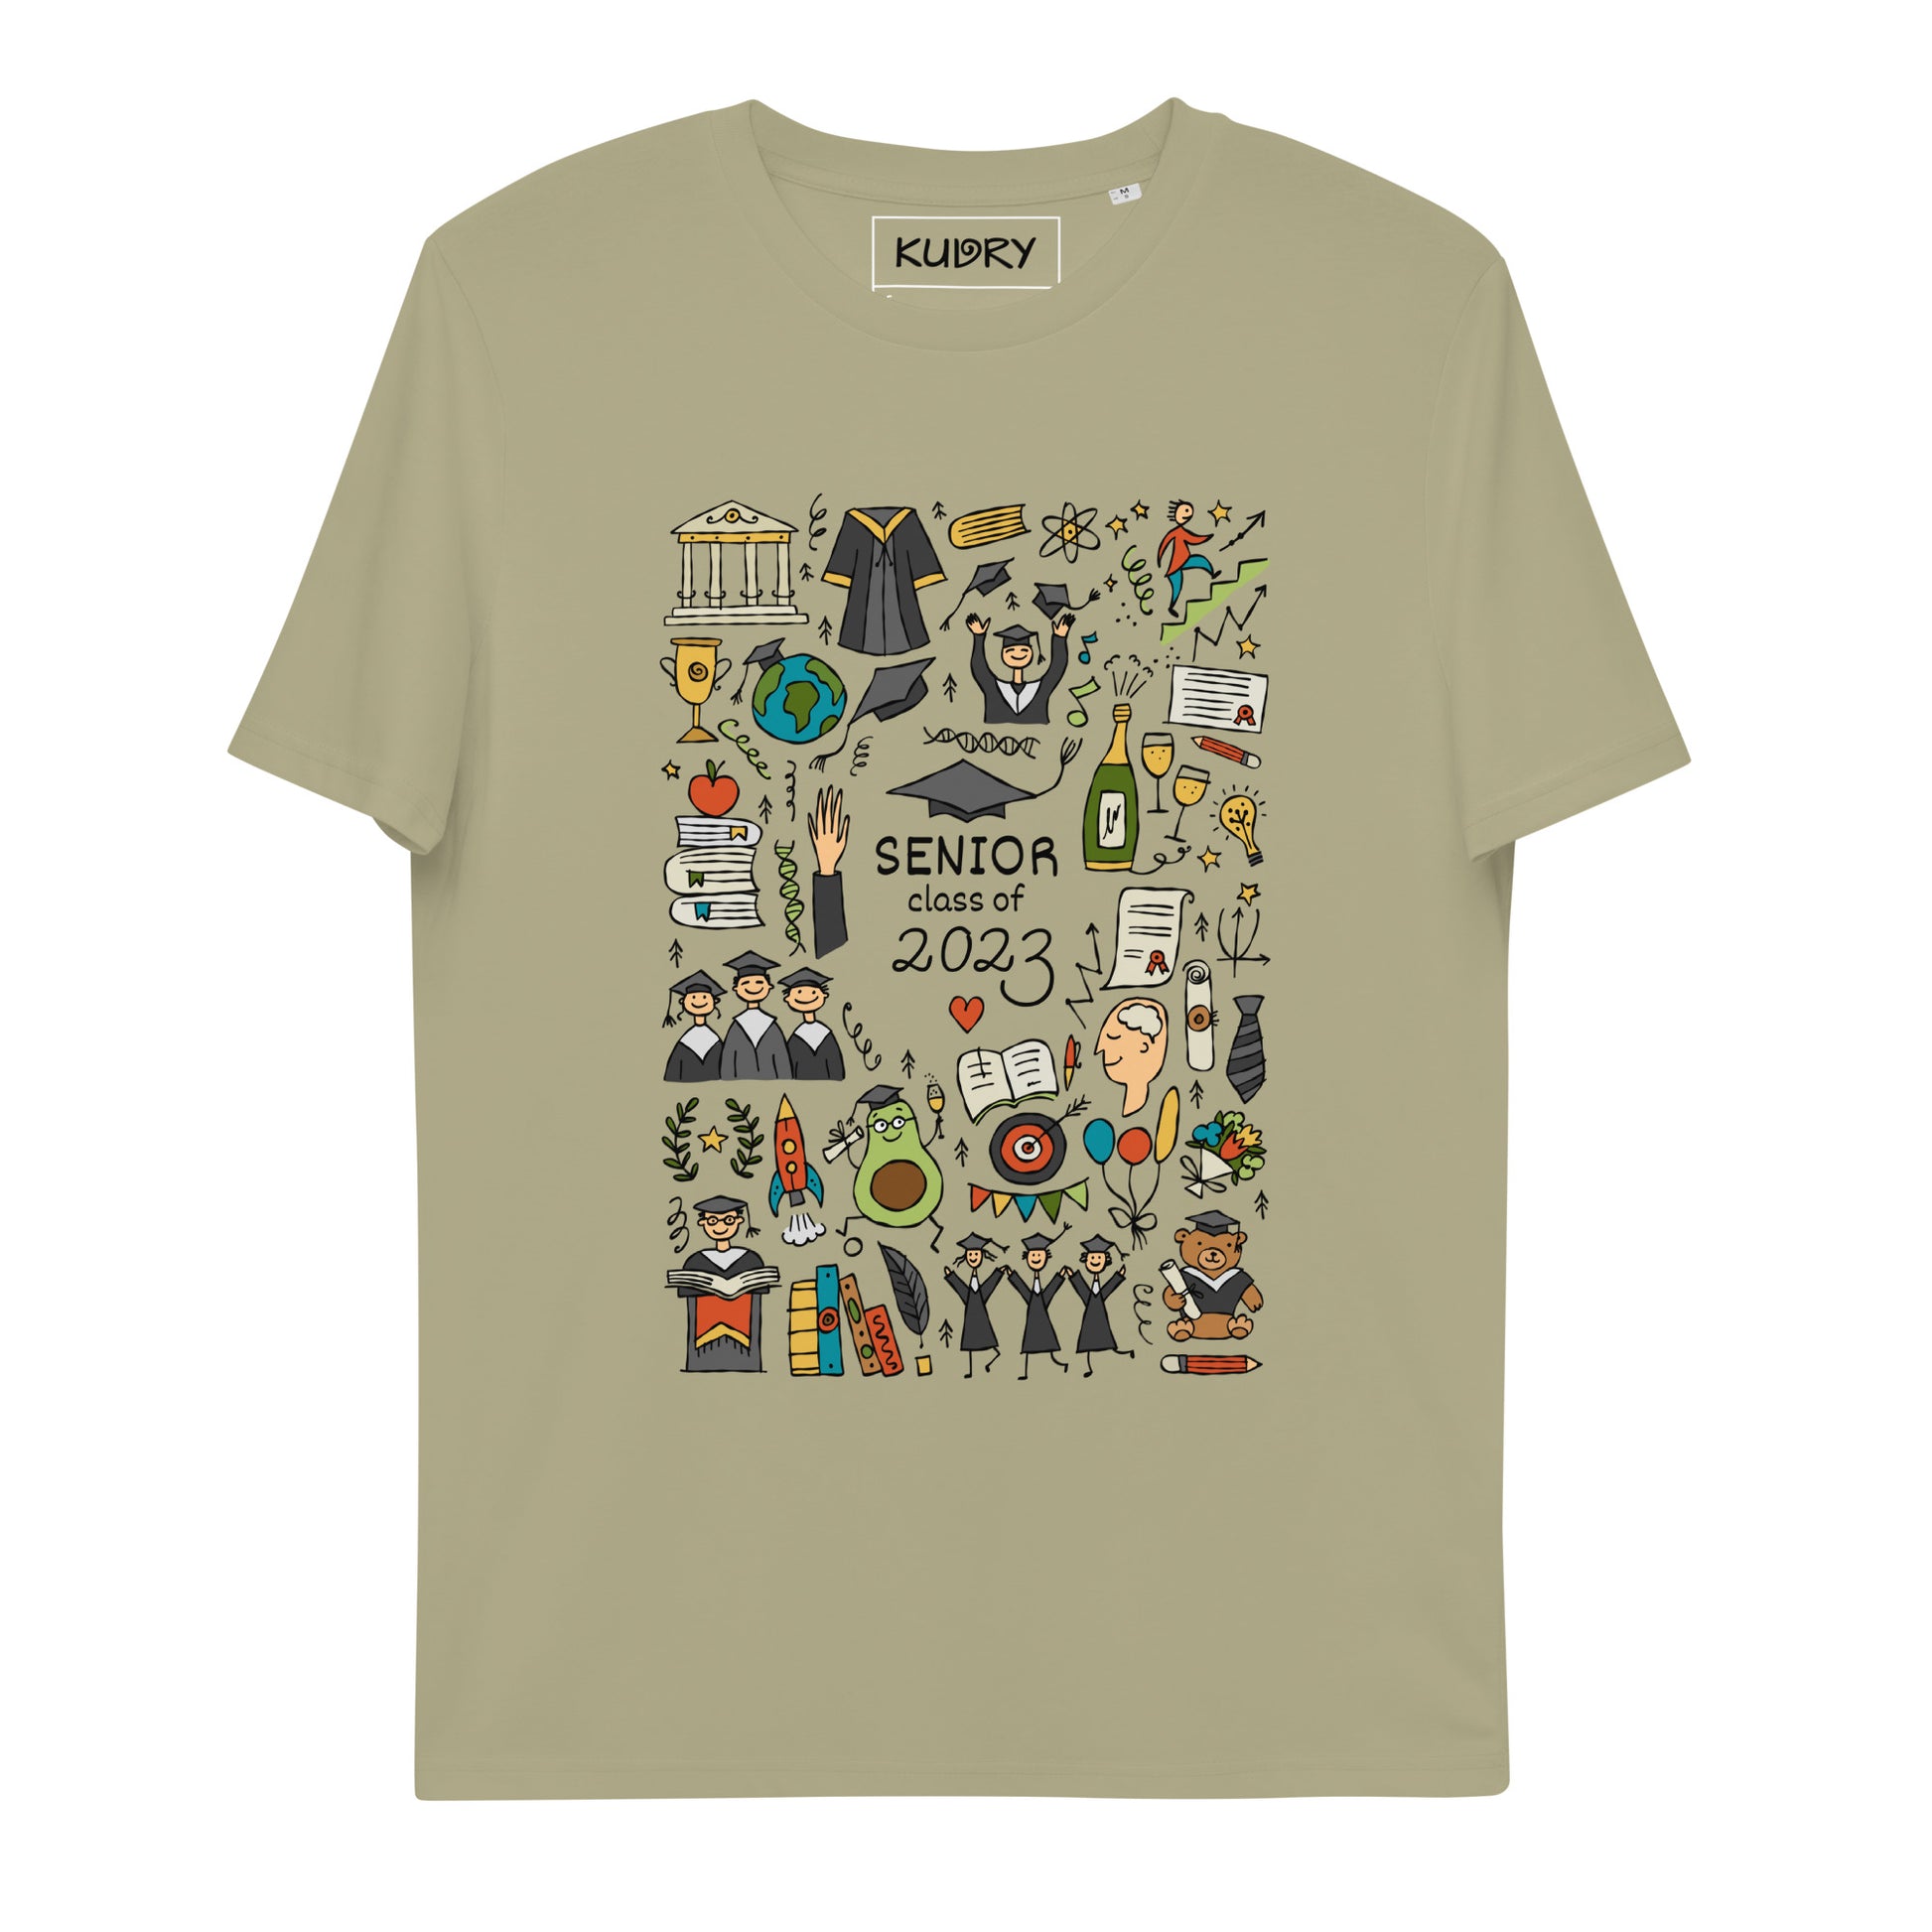 Personalised graduation 2023 olive t-shirt with funny designer print featuring graduates in hats and mantles, holiday-themed motifs, and a graduation teddy bear.